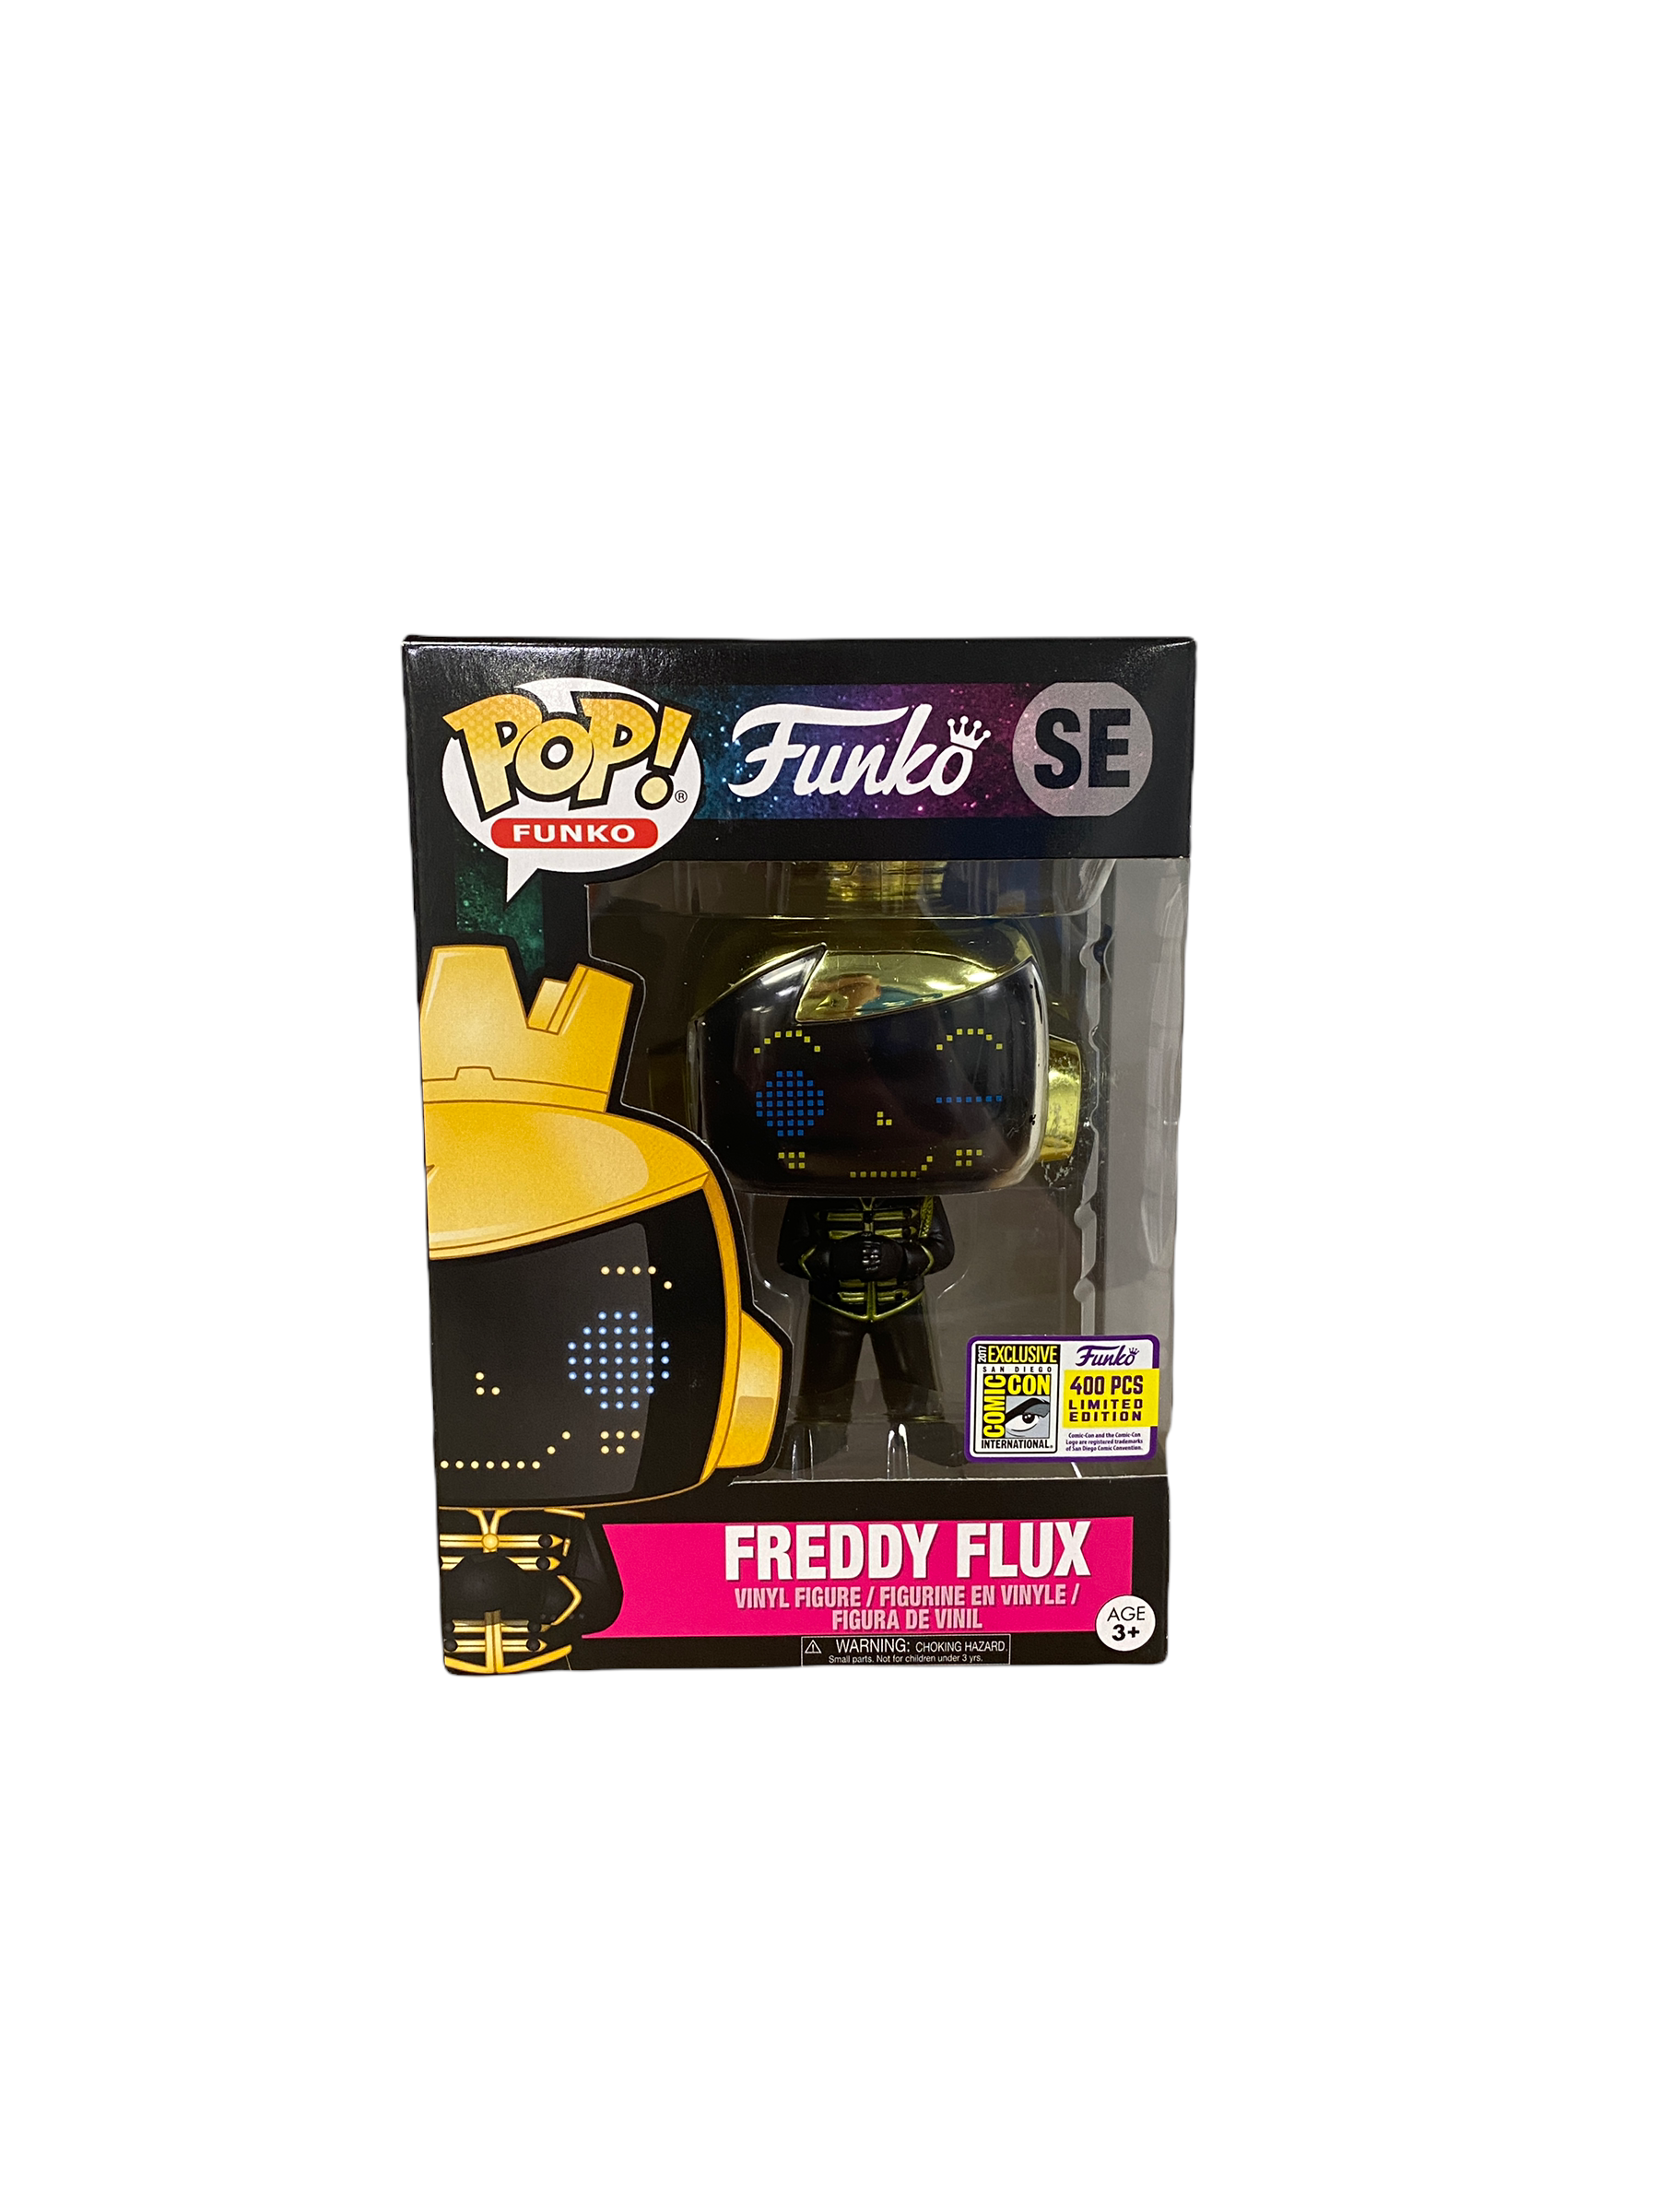 Freddy Flux Set Of 4 - SDCC 2017 Exclusive LE400 for Each Piece - Condition Varies From 9 to Mint/Near Mint